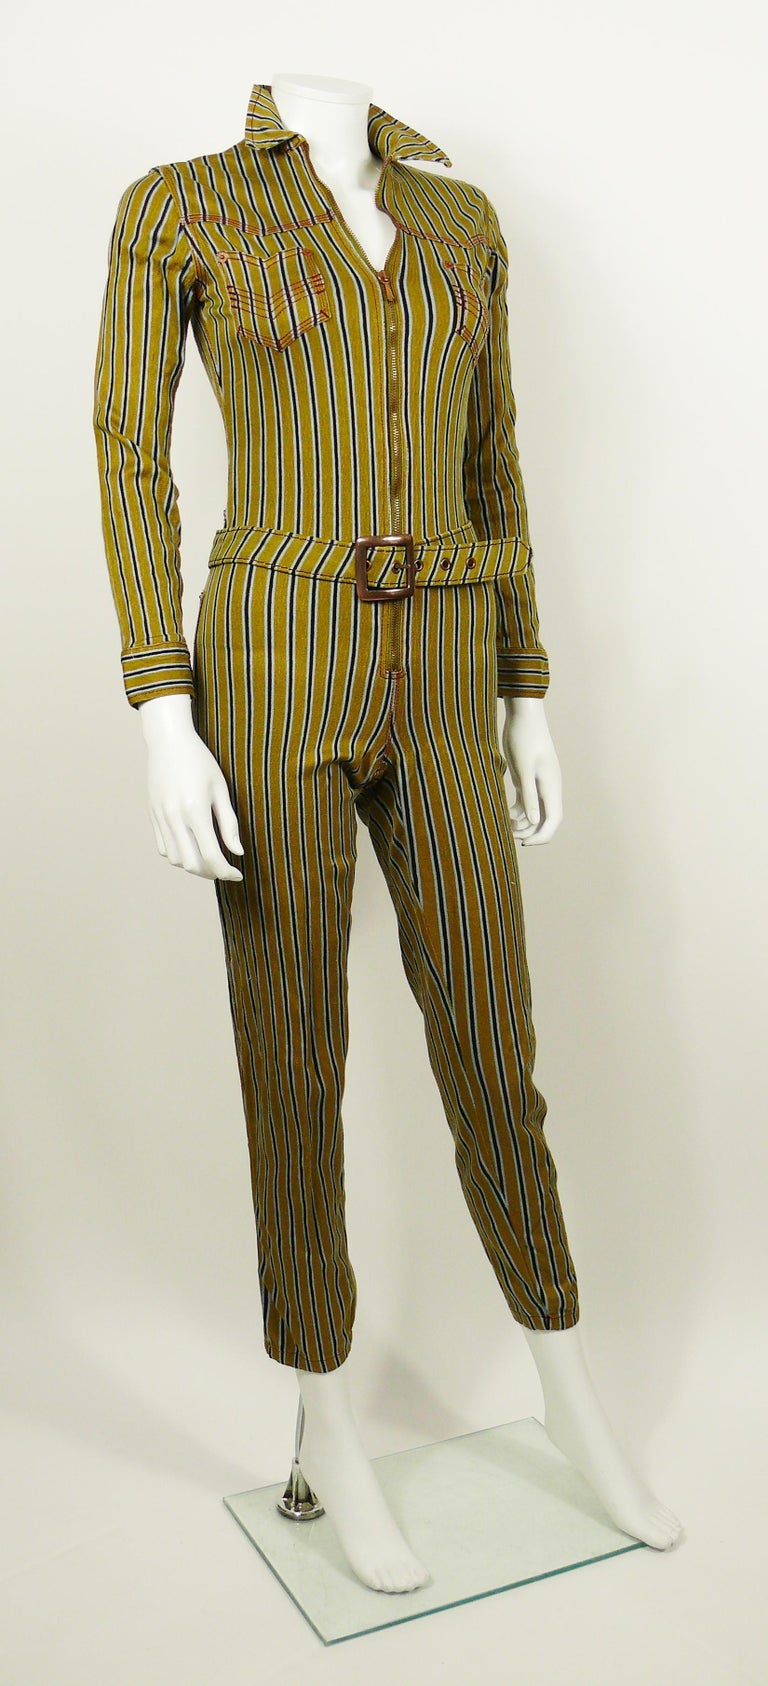 JEAN PAUL GAULTIER vintage rare striped zip-front utility jumpsuit.

This jumsuit features :
- Long sleeves with button cuffs.
- Stretchy fabric.
- Zip-front closure.
- Two breast pockets and two back pockets.
- Pointed collar.
- Contrast stitch